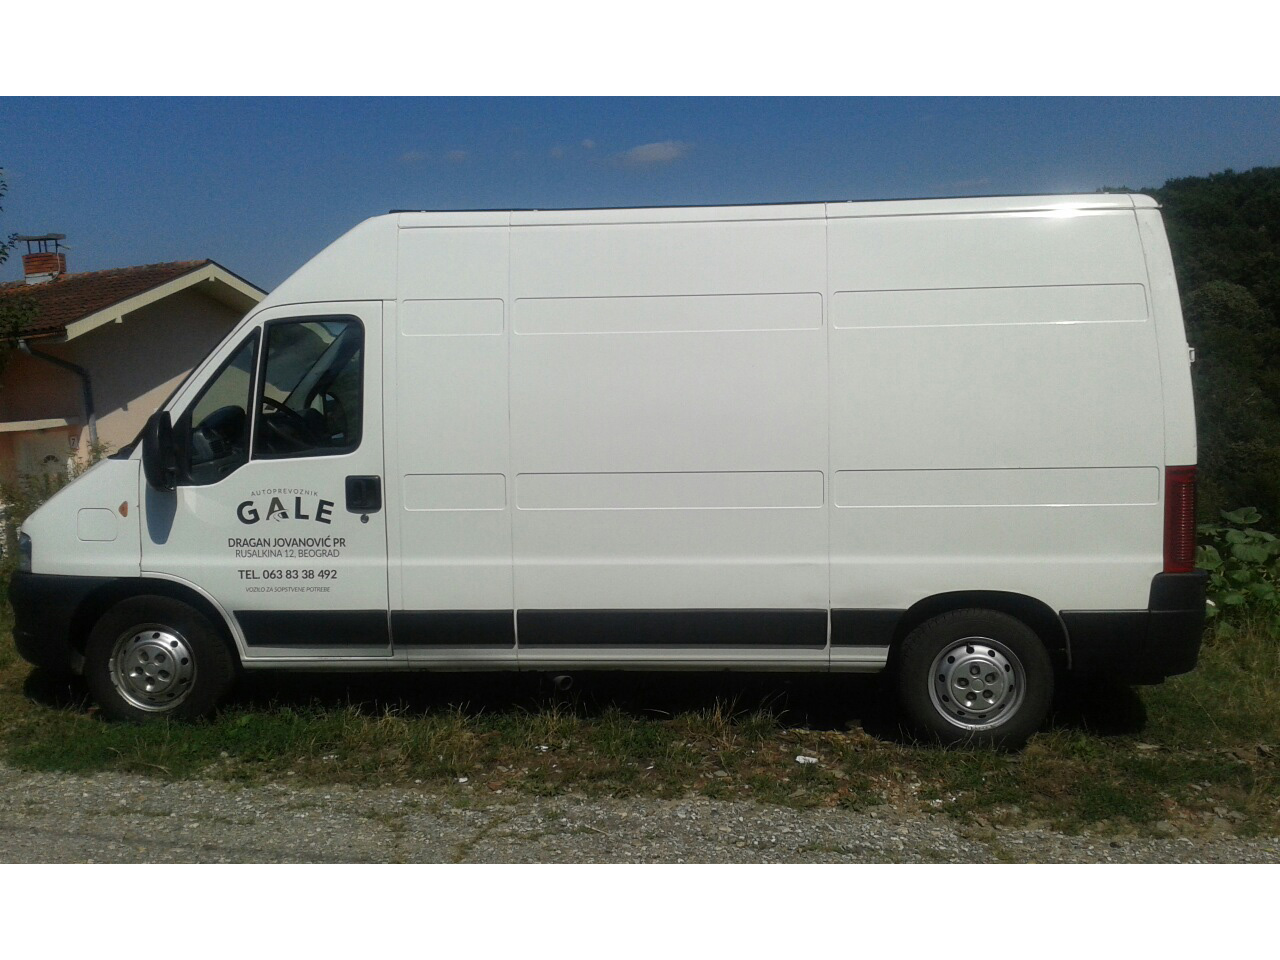 TRANSPORTER GALE - VAN TRANSPORTATION - TOWING MOVING SERVICES Moving Beograd